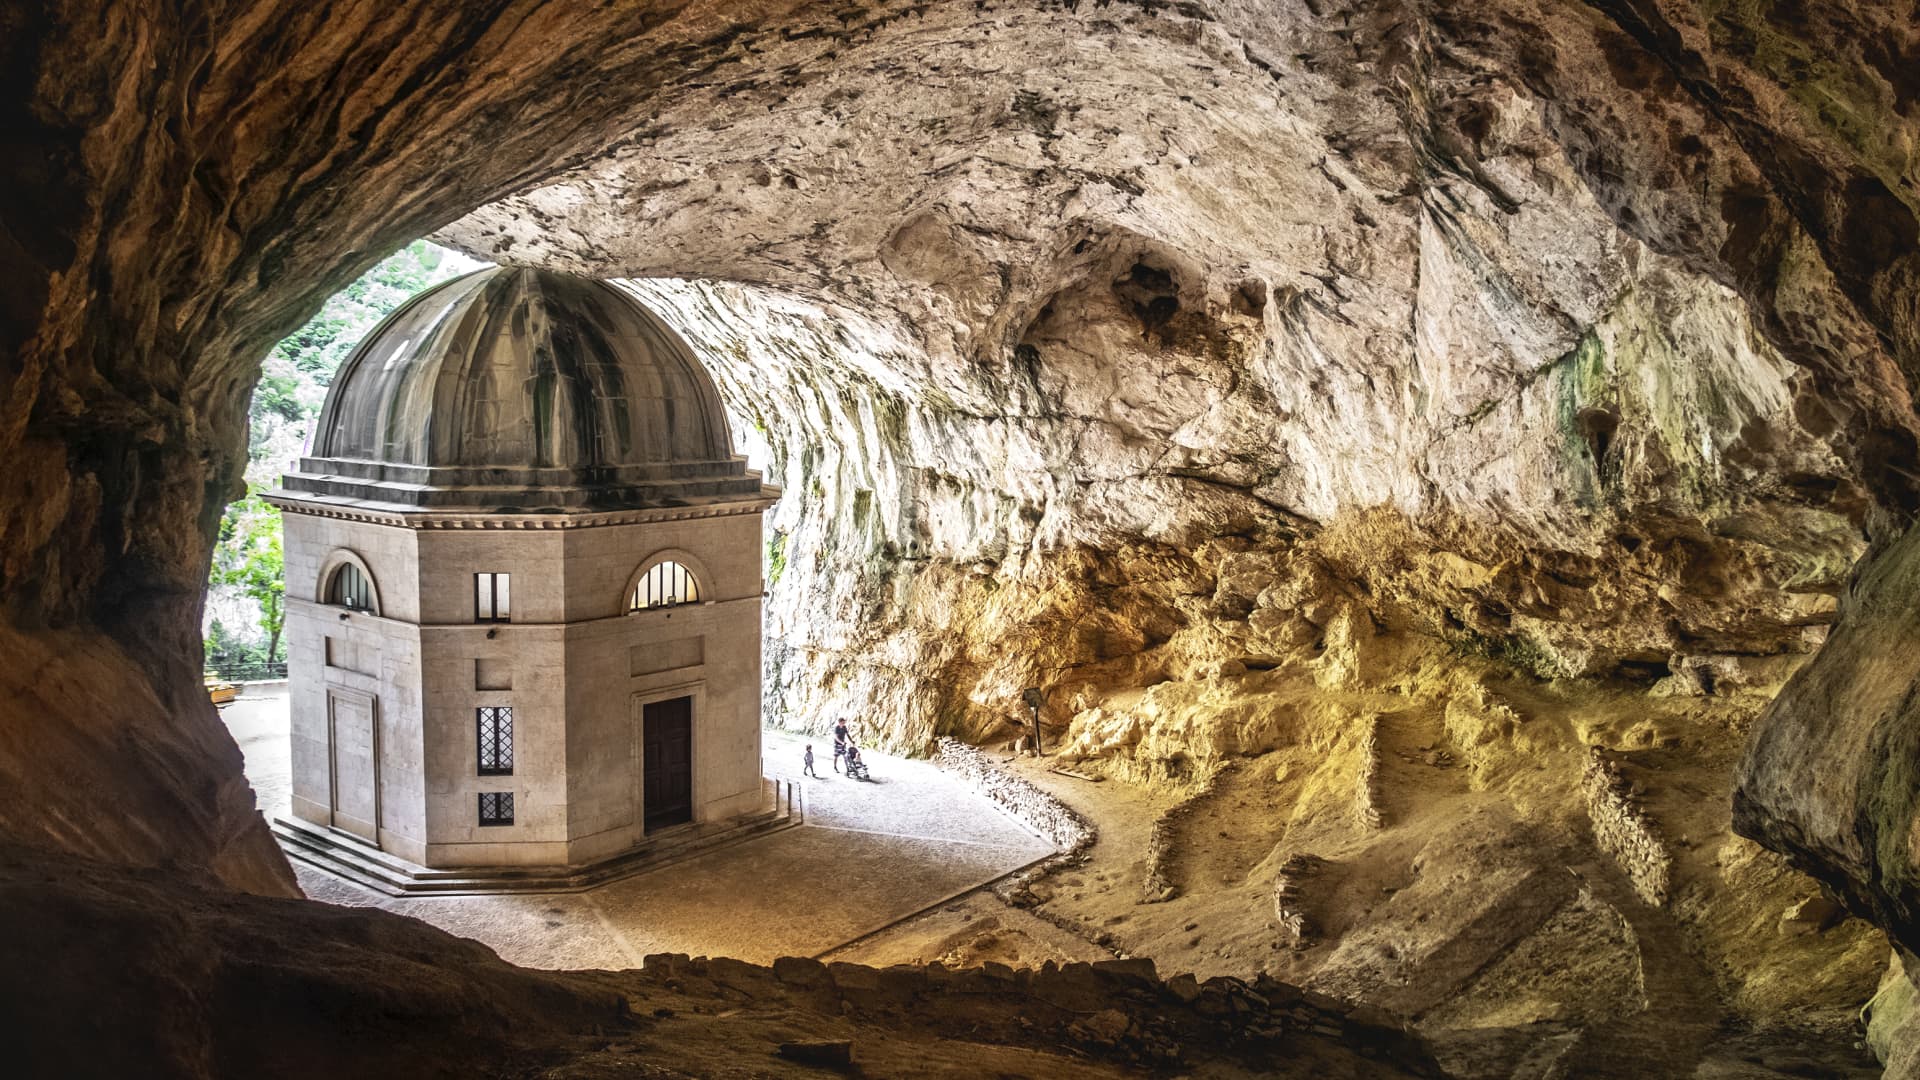 Like the Grotte di Frasassi, the Temple of Valadier is also located near the small village of Genga, home to fewer than 1,700 people, in a remote part of the Ancona province of Marche.